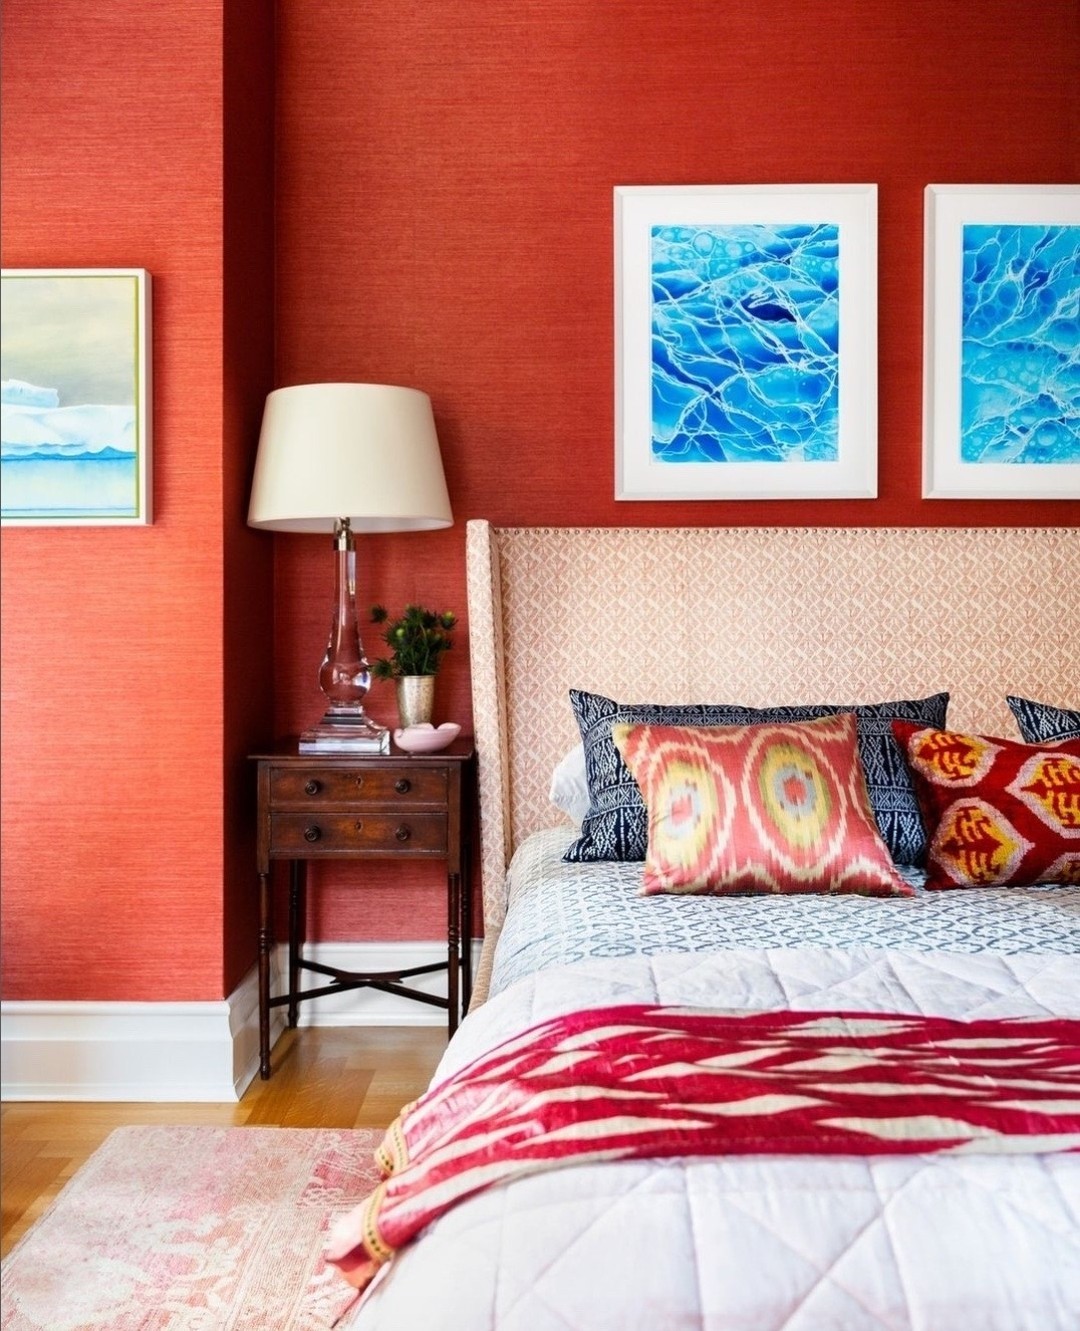 Vibrant Red and Blue Small Bedroom Decor Color Scheme